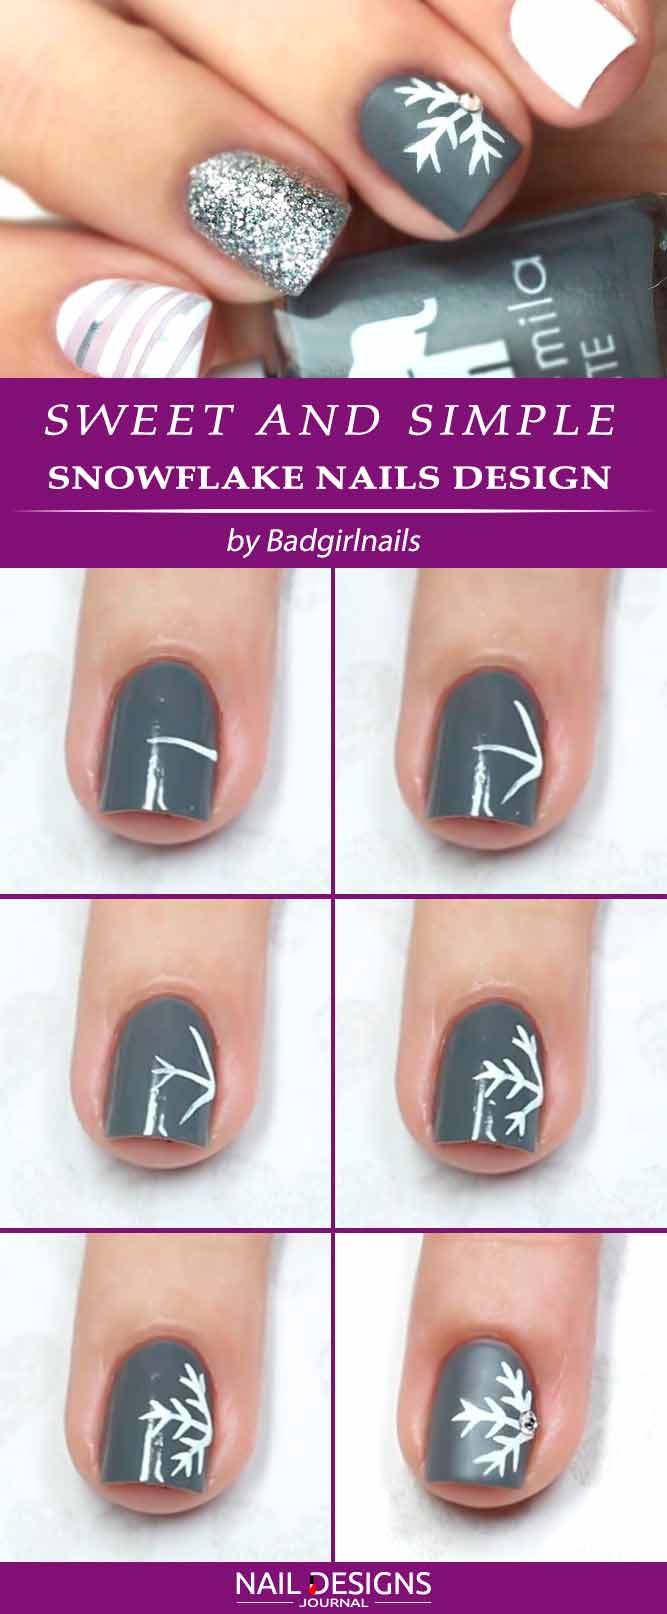 Sweet And Simple Snowflake Nails Design